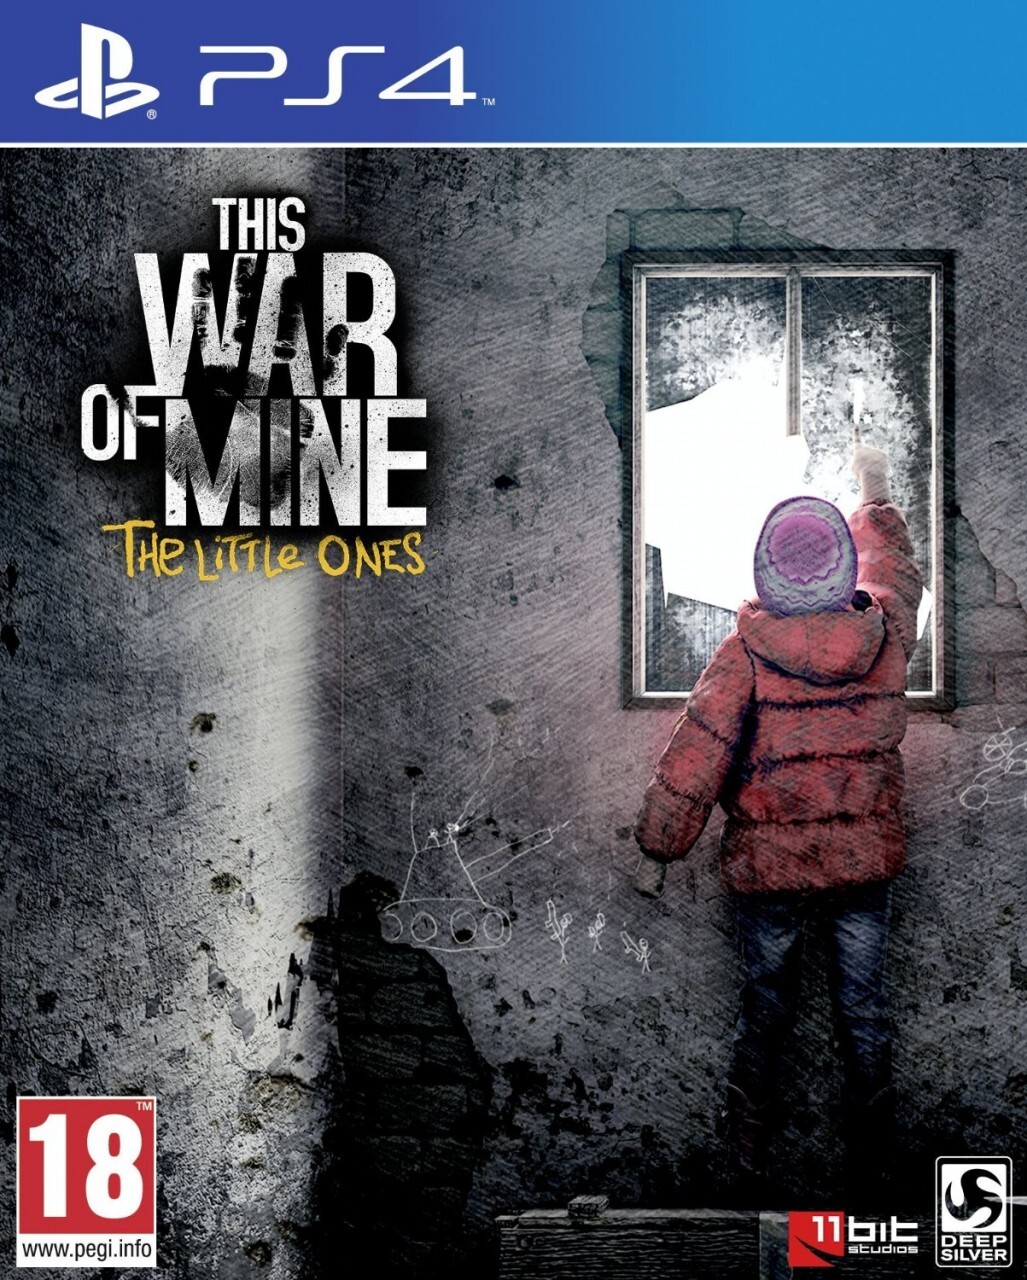 Deep Silver This War of Mine - The Little Ones video-game PlayStation 4 Basis Duits, Engels, Spaans, Frans, Italiaans PlayStation 4